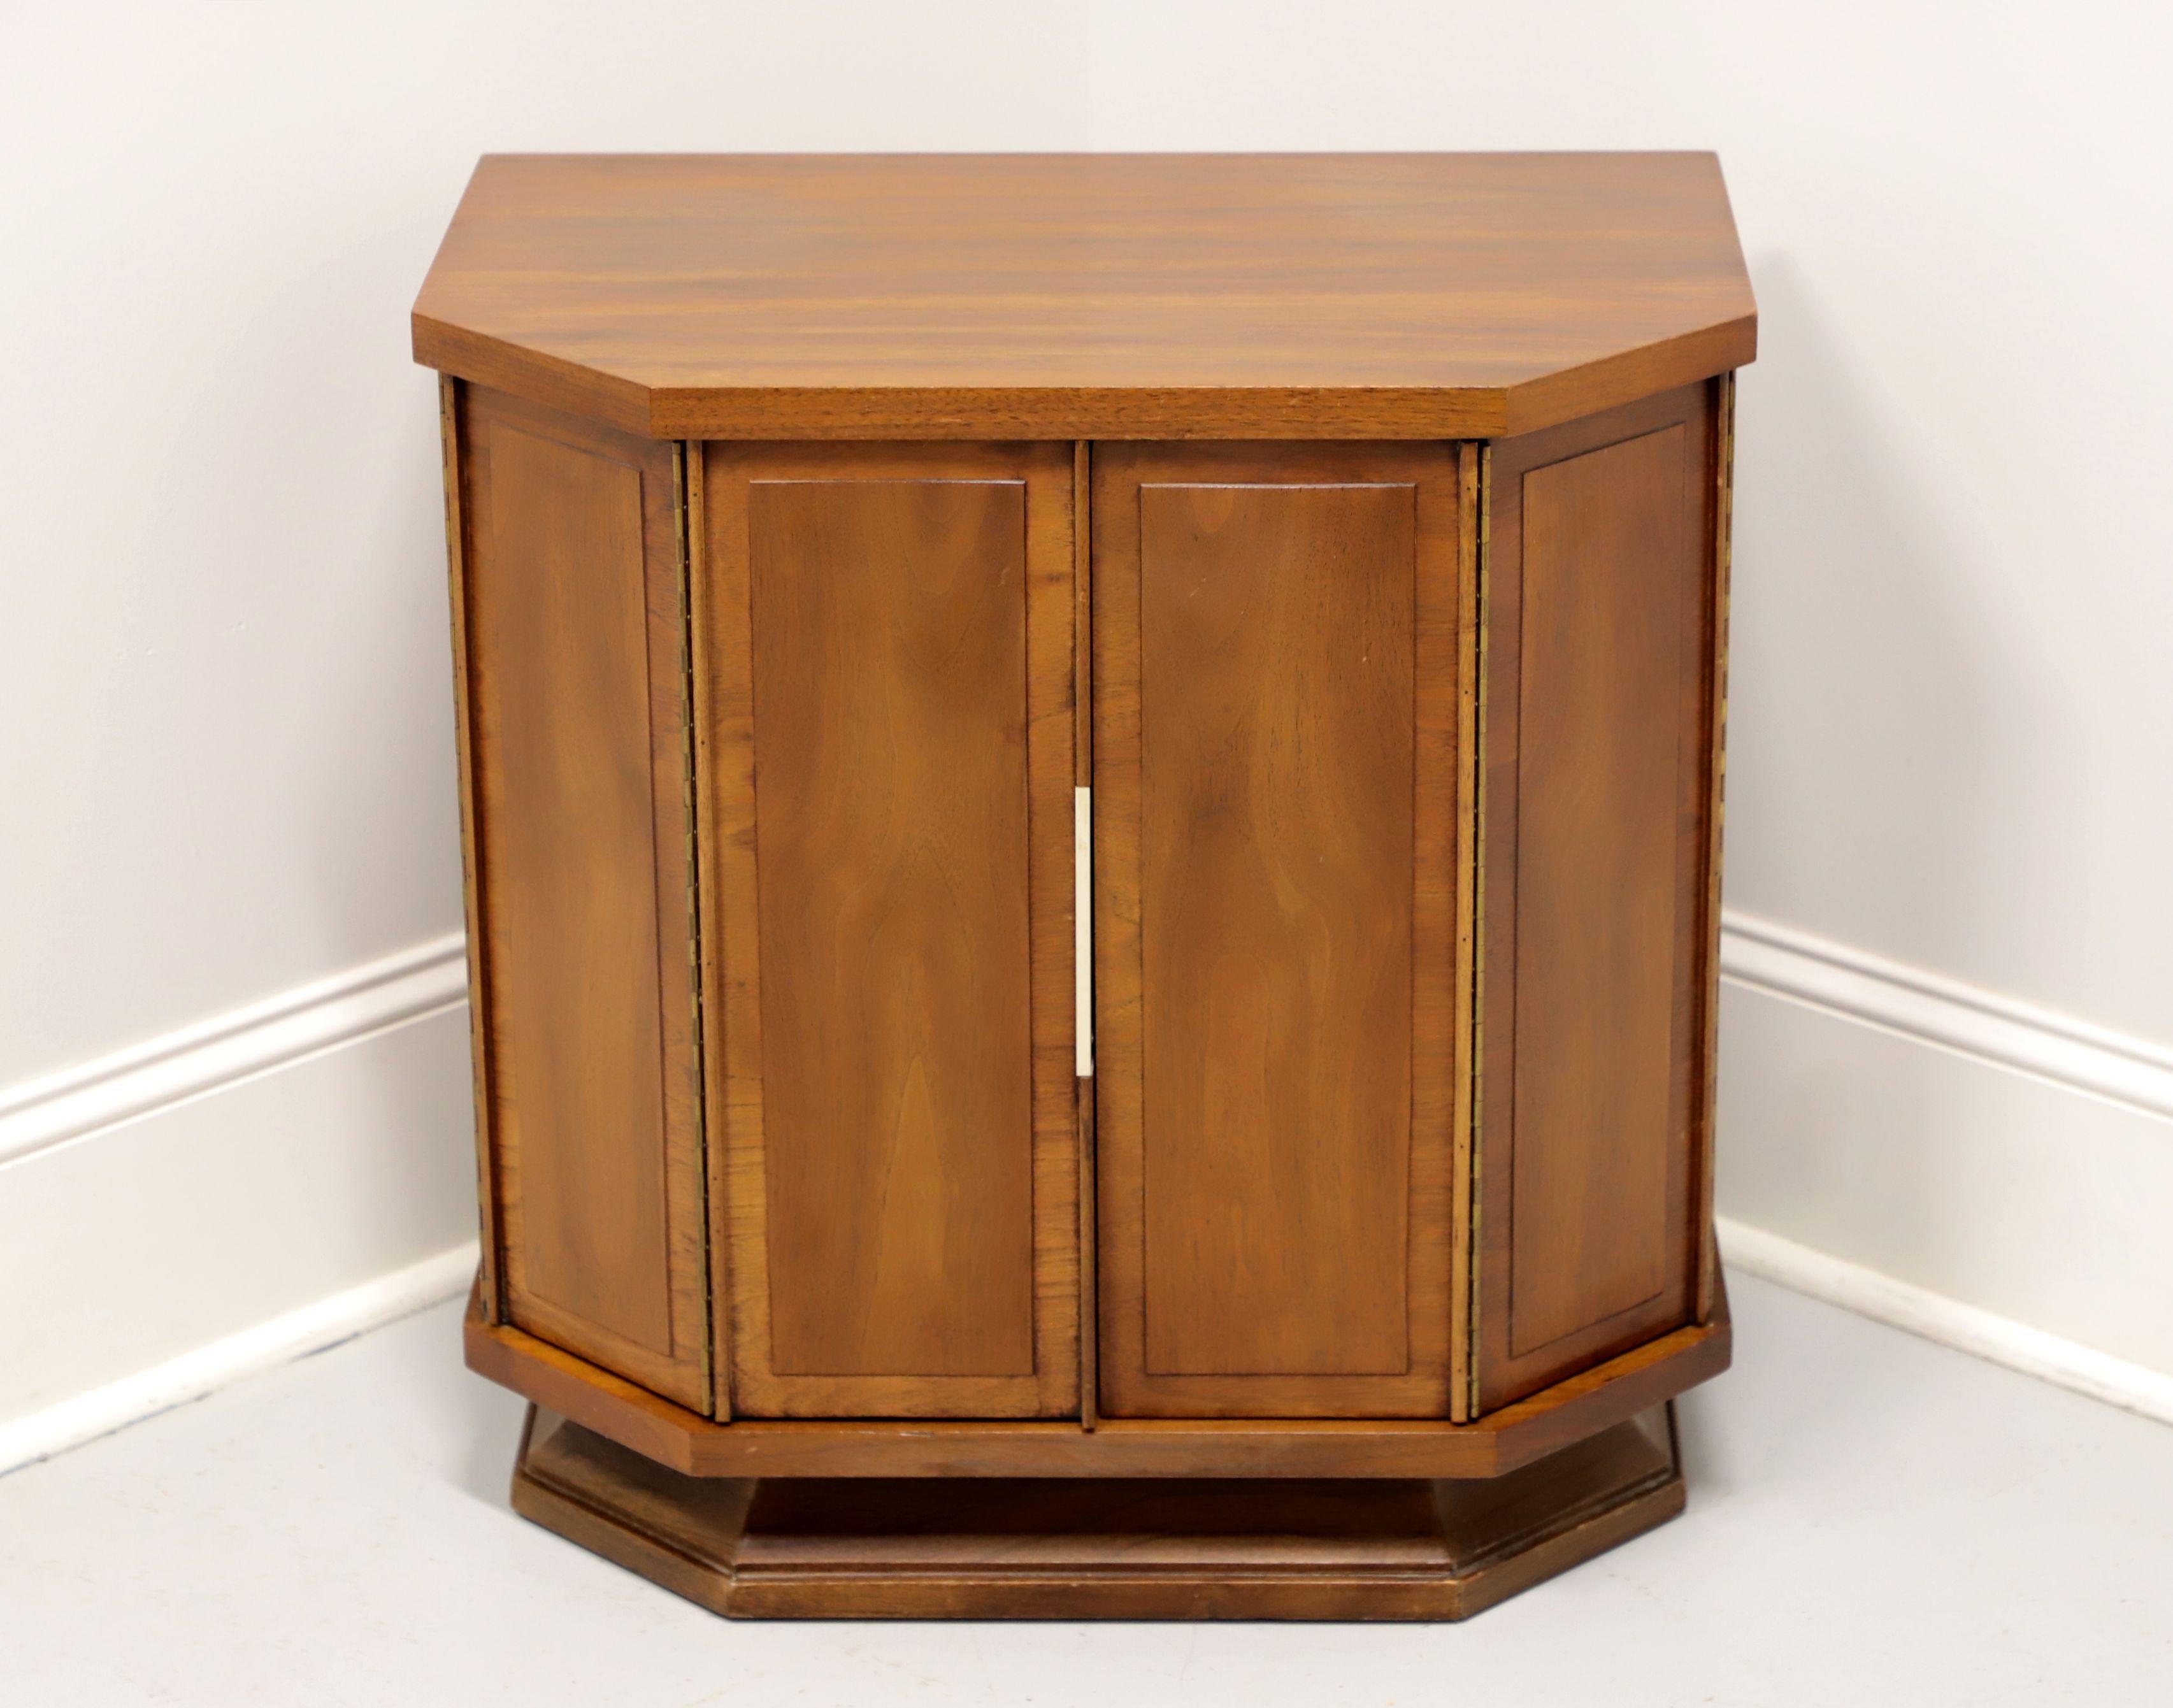 A Mid Century Modern nightstand by Kent Coffey, of Lenoir, North Carolina, USA, from their Impact line. Walnut and elm, brass hardware, banded door fronts and sides. Features dual bifold doors revealing one dovetail drawer and storage area with one